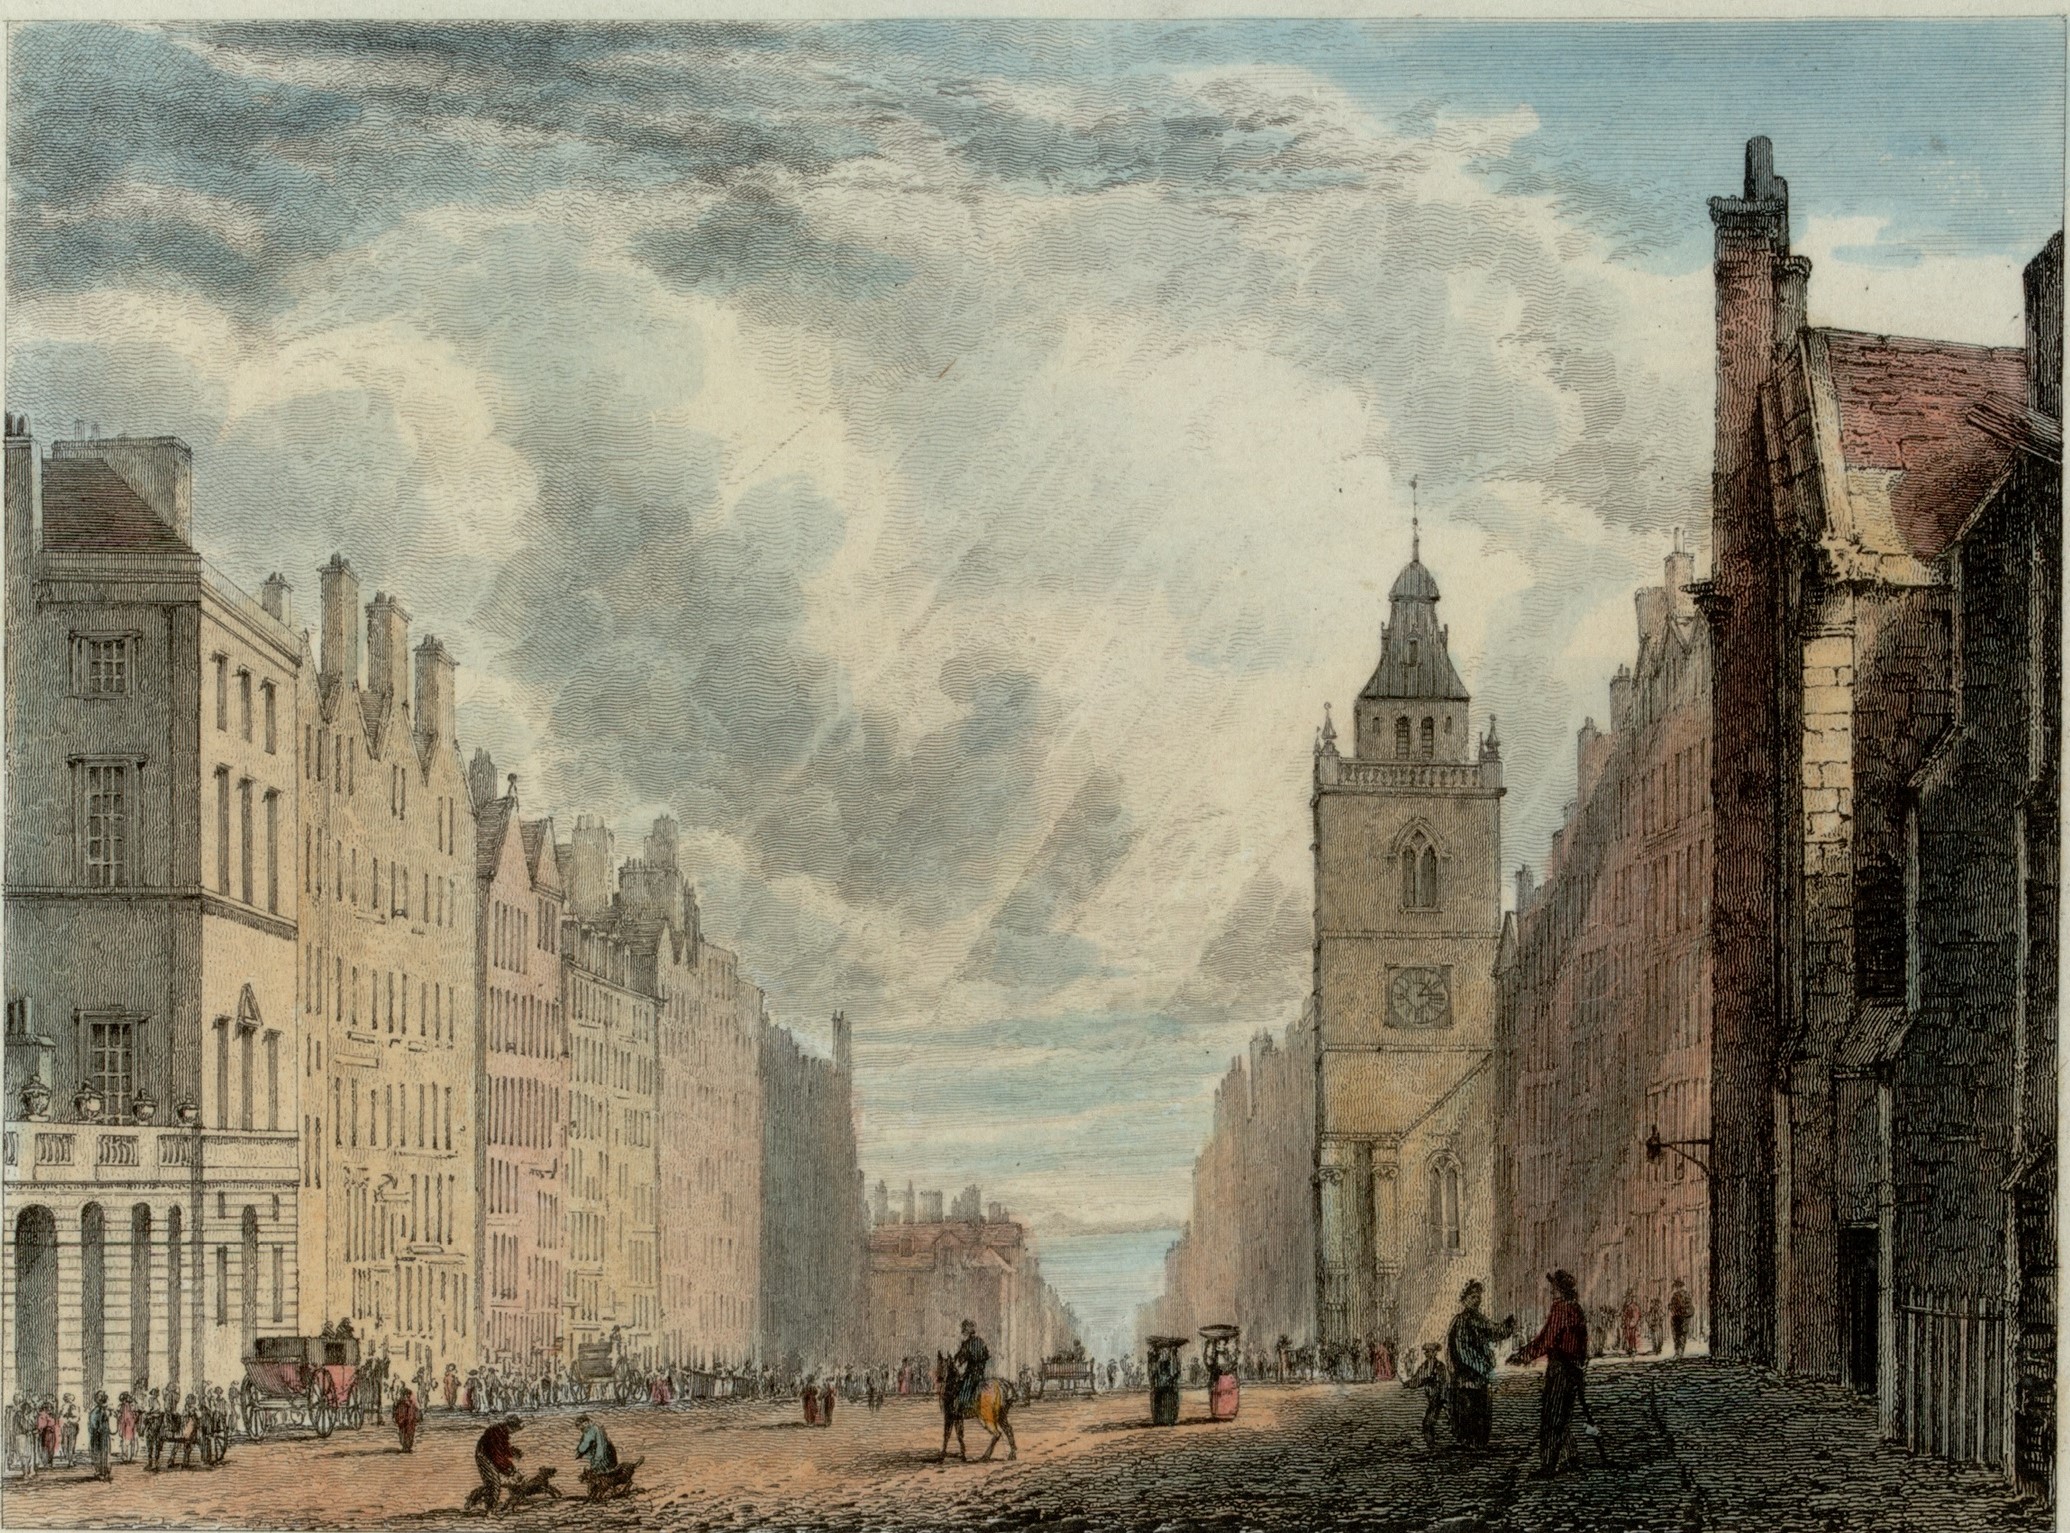 A colourful painting showing Edinburgh's lively High Street